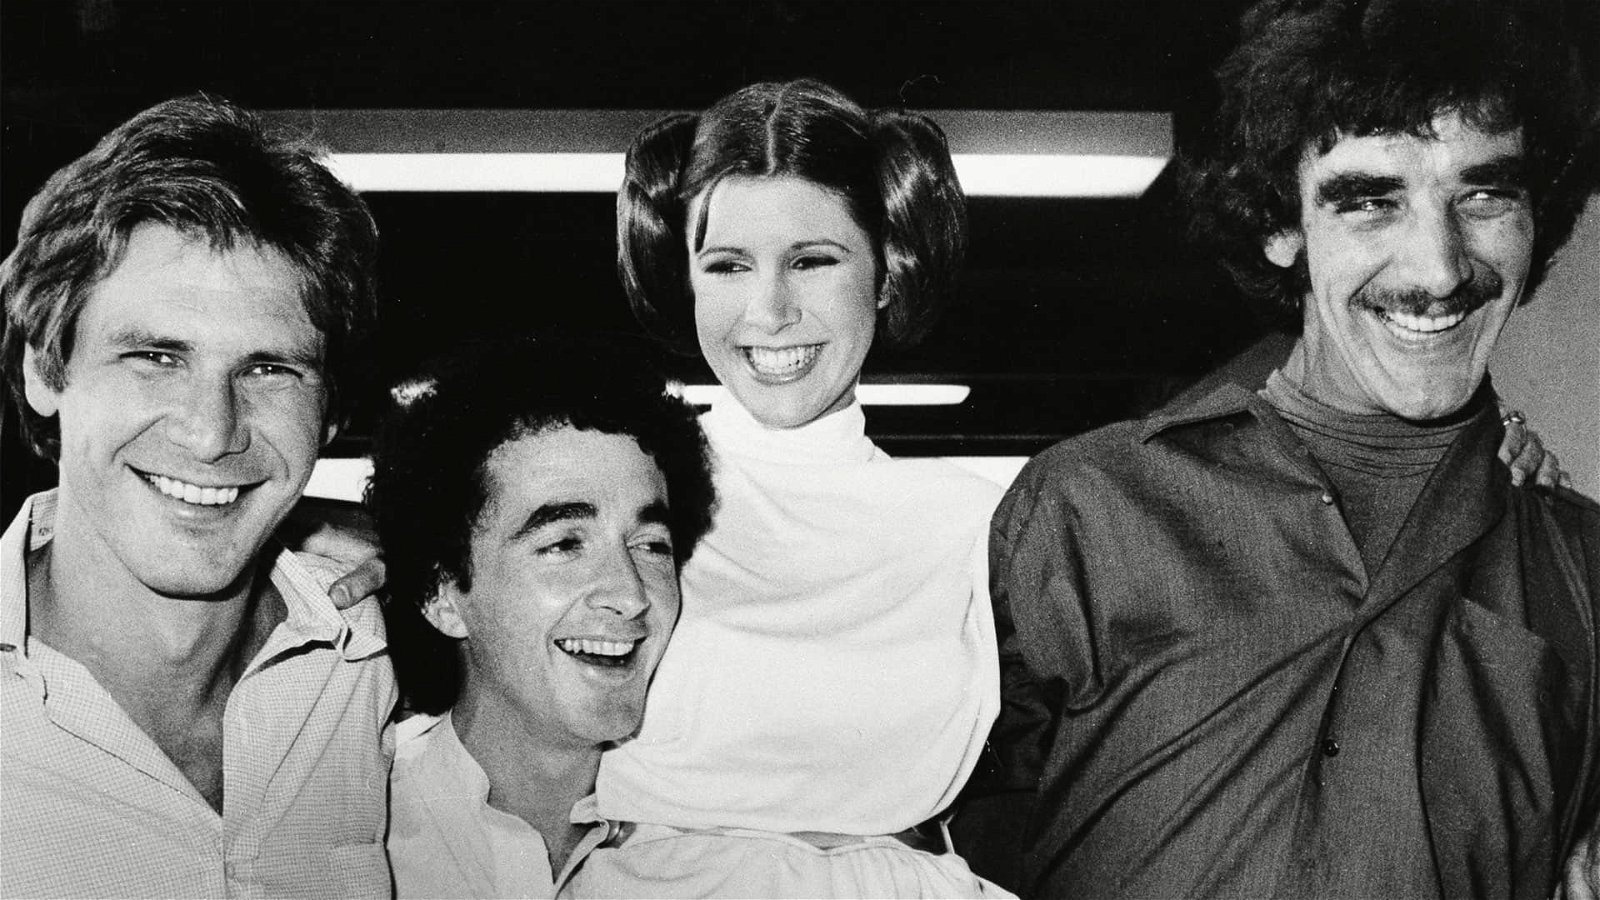 Chewbacca Actor Peter Mayhew Passes At Age 74 1